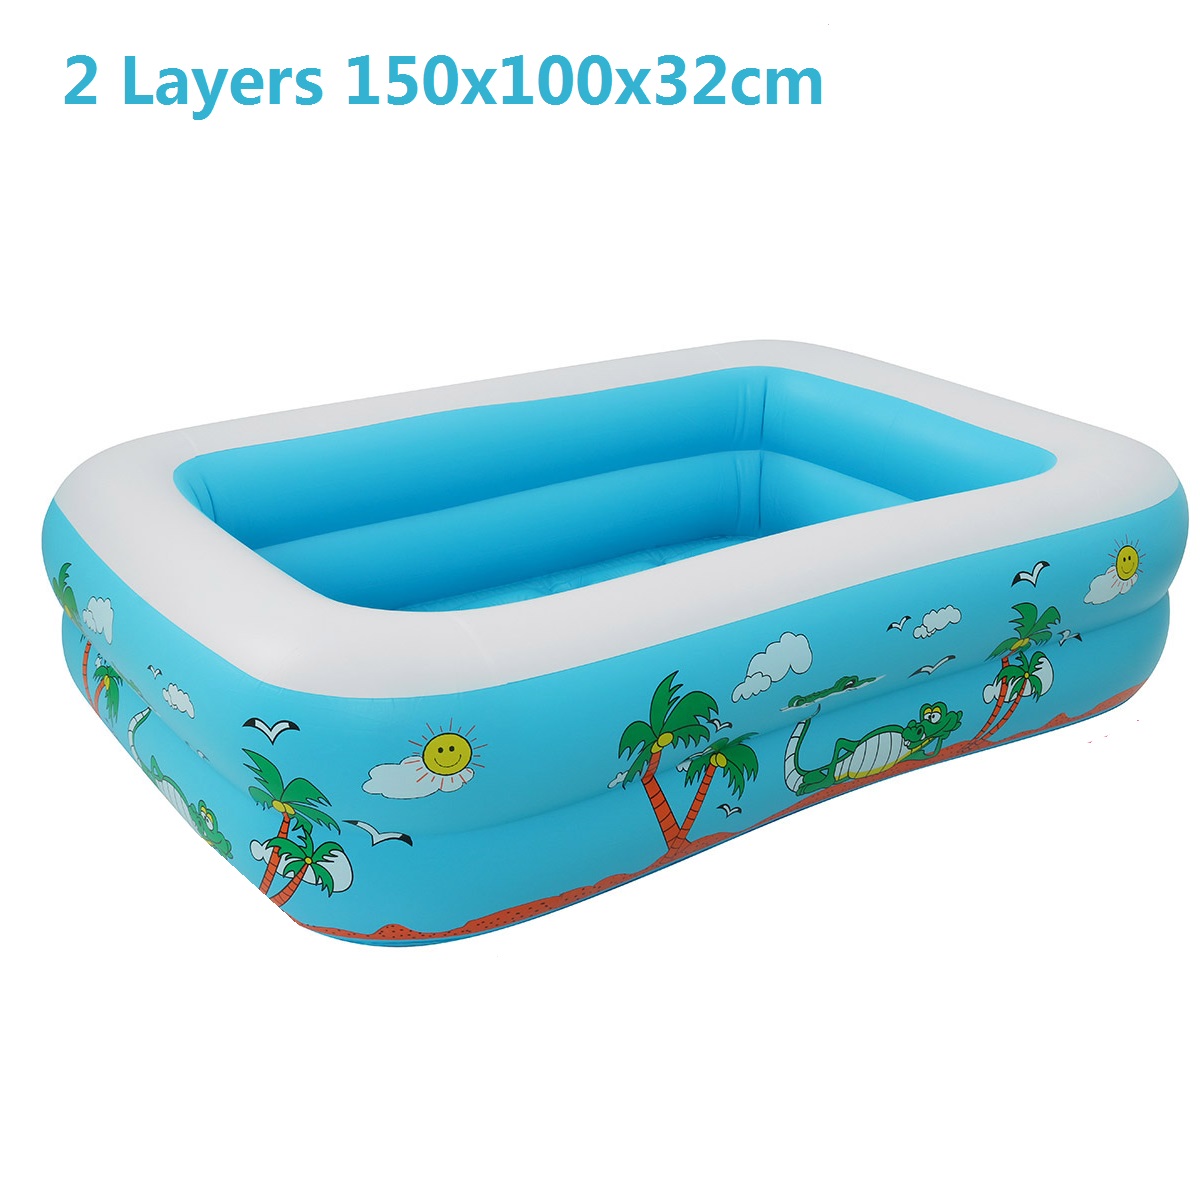 120-150CM-Family-Inflatable-Swimming-Pool-3-Ring-Thicken-Summer-Backyard-Inflate-Bathtub-for-Kids-Ad-1696845-12